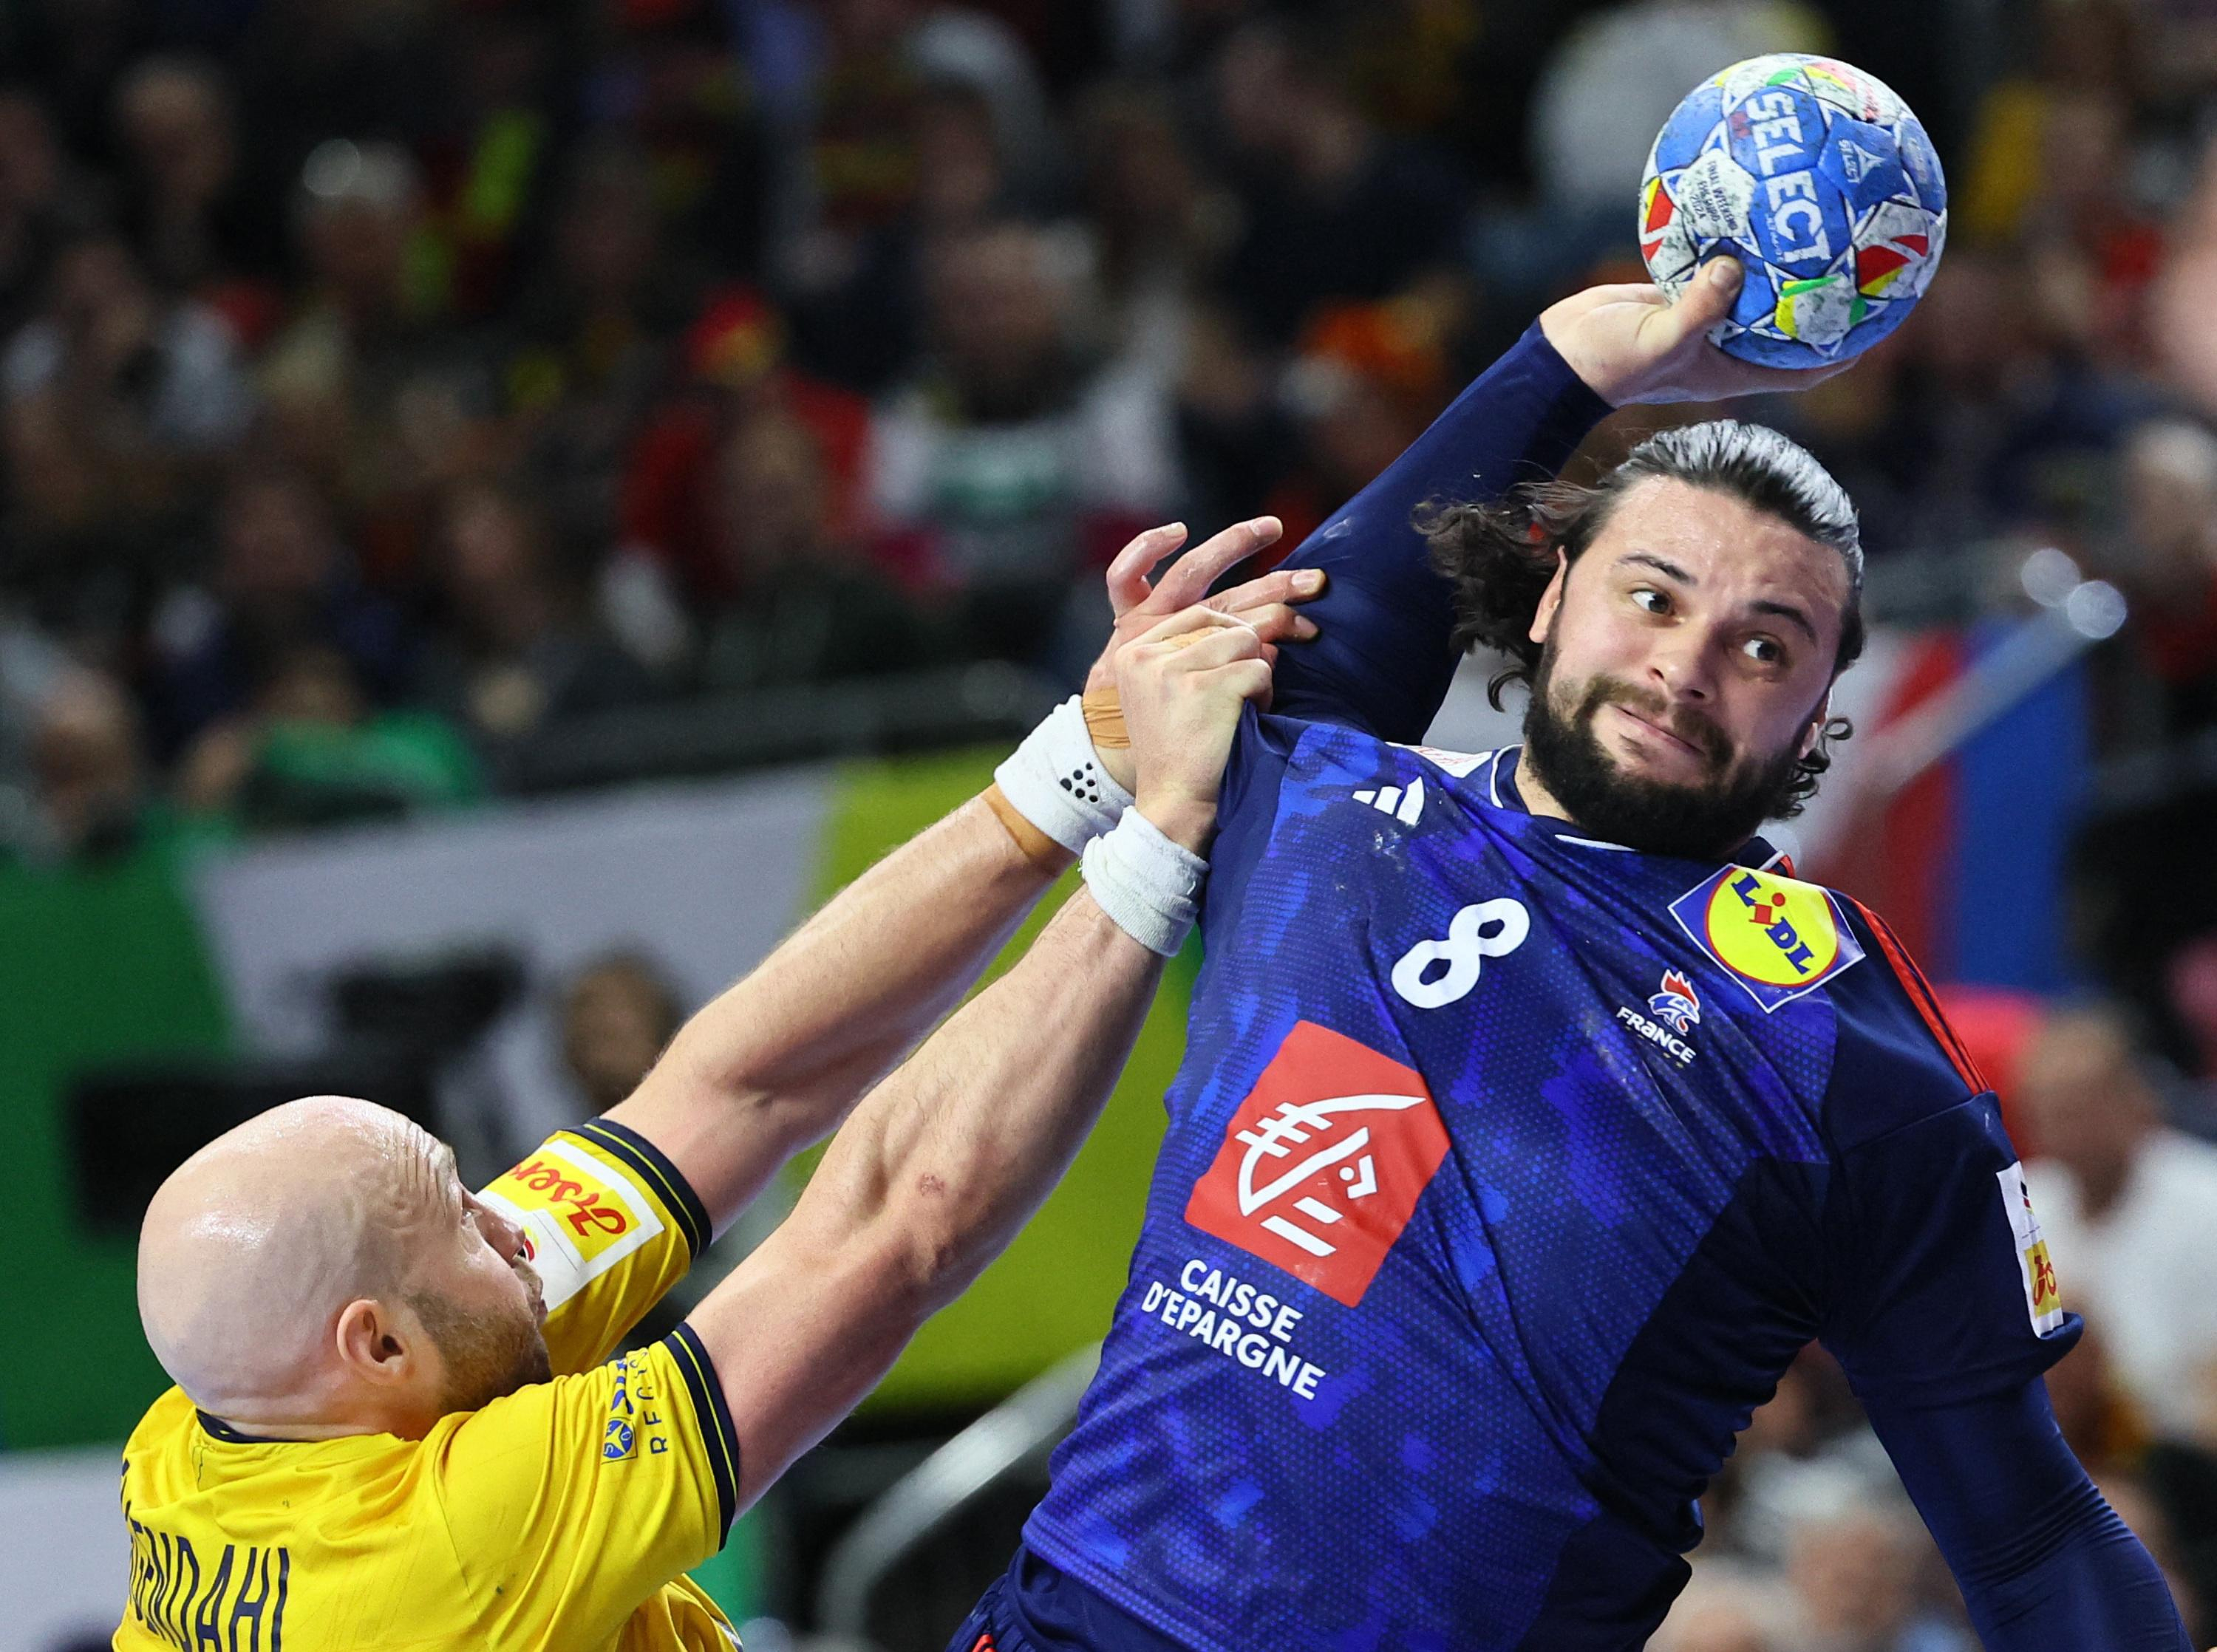 Euro handball: at the end of a staggering scenario, the Blues dismiss Sweden and reach the final